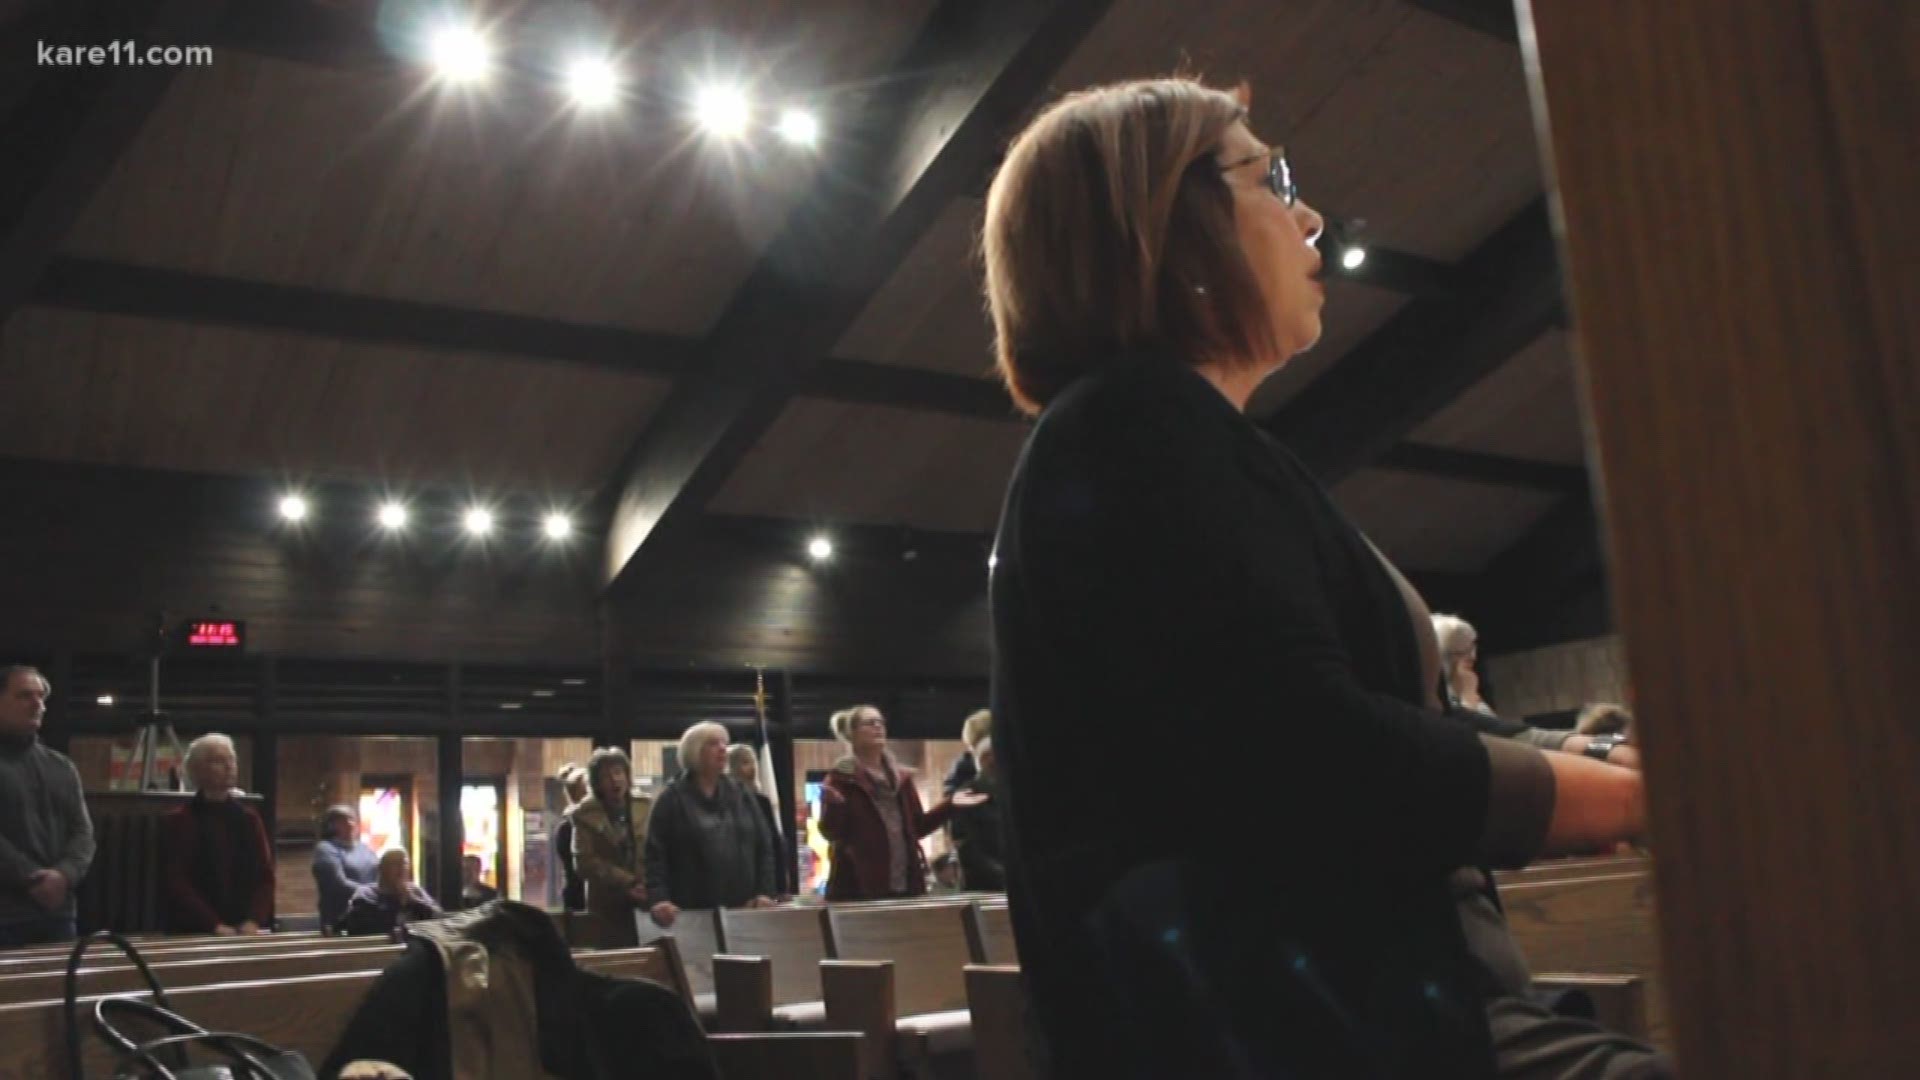 After their church burned down last week in Norwood Young America, members of the Church In The Maples congregation joined the service at Arlington United Methodist Church.